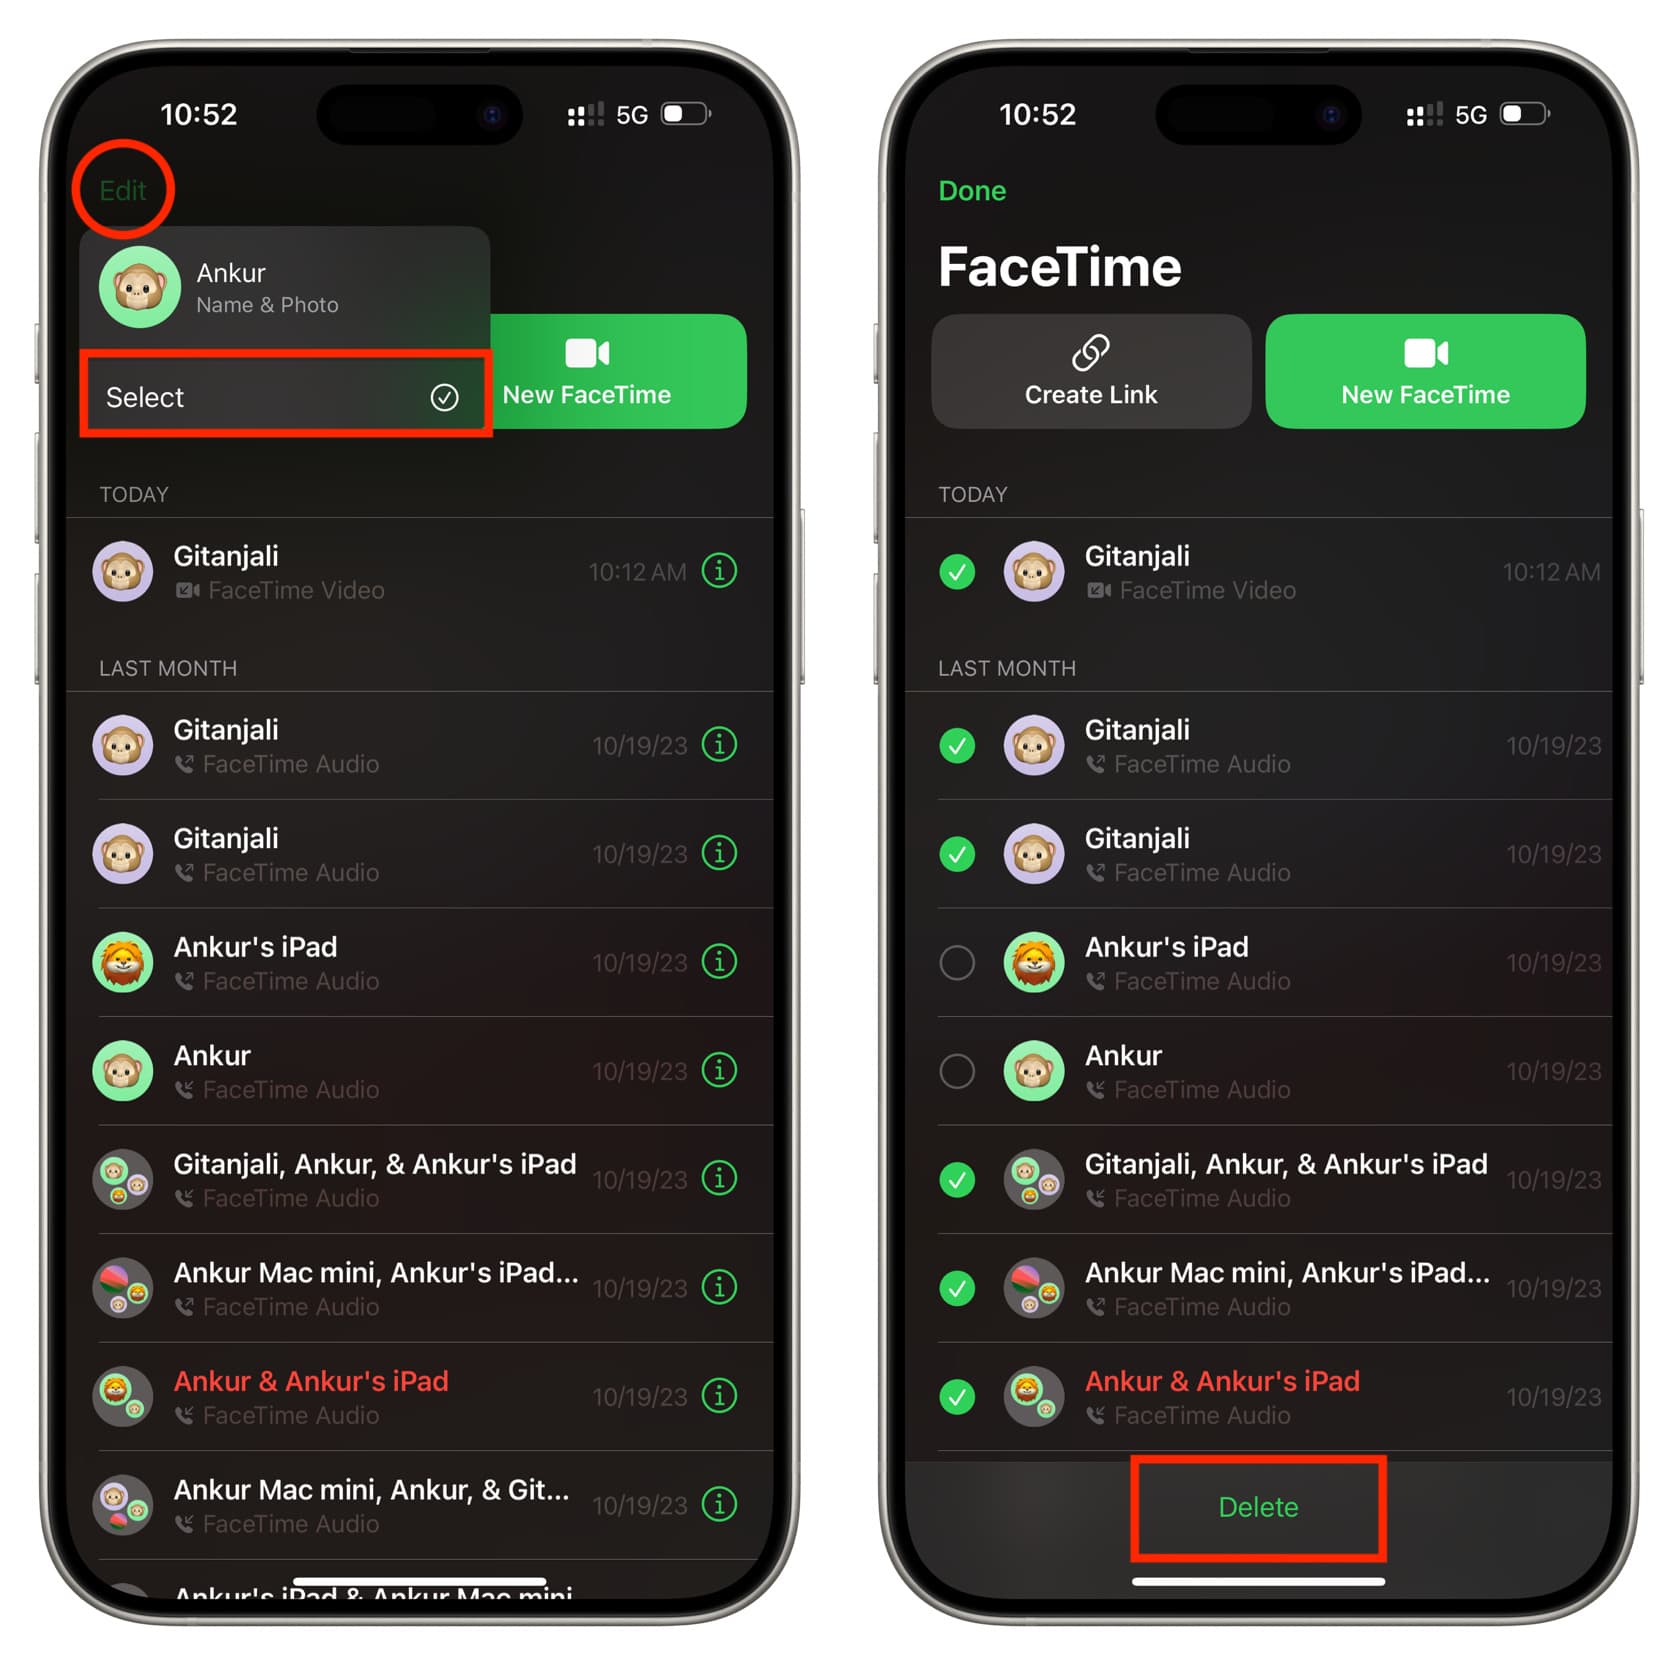 Select and delete recent calls in iPhone FaceTime app